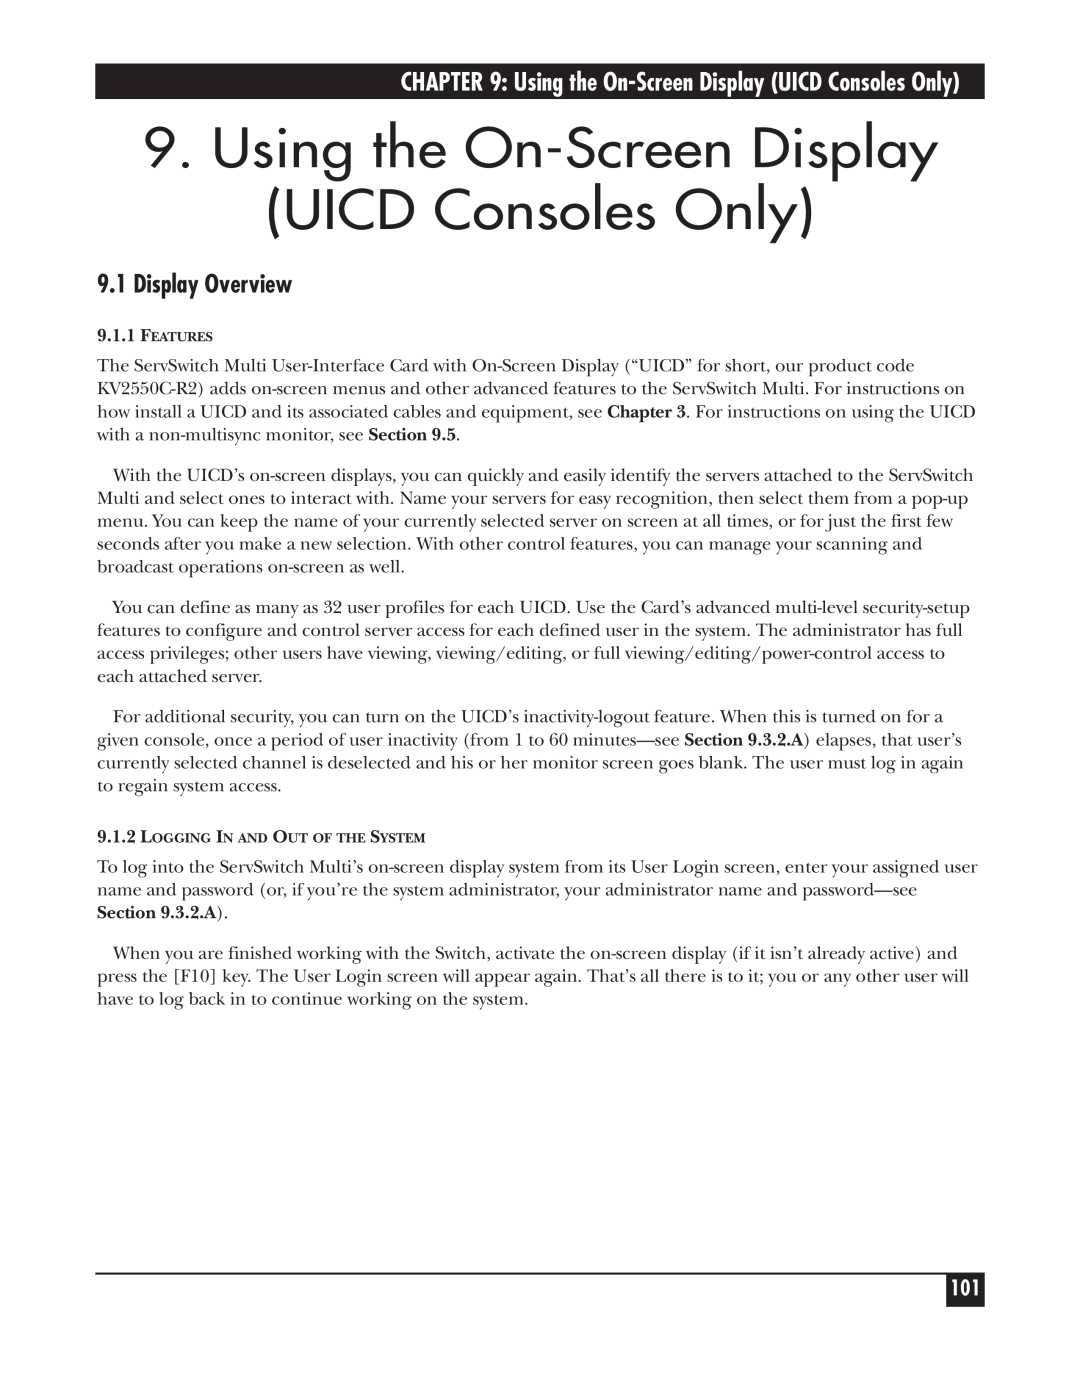 Black Box KV162A manual Using the On-Screen Display UICD Consoles Only, Display Overview 